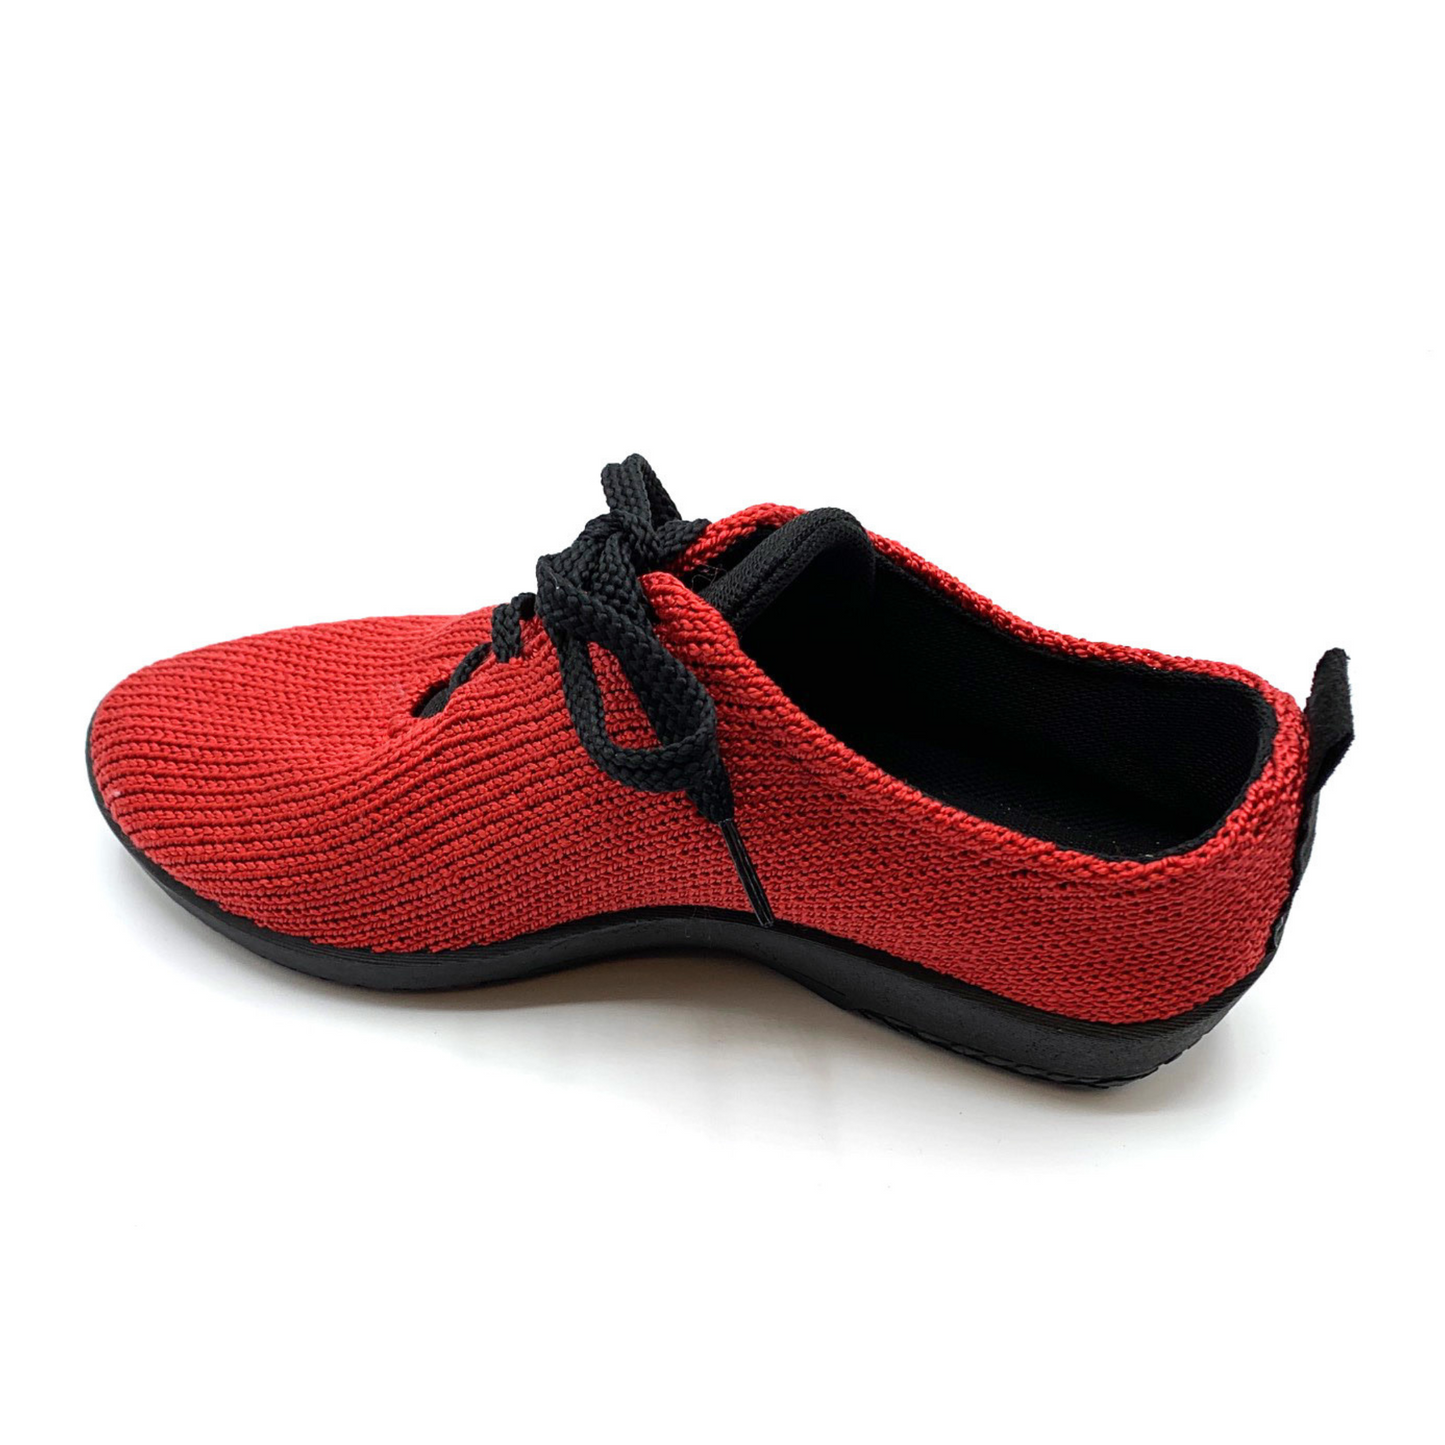 Knit red sneaker at a slight back angle showing interior black lining, sole, and shoe strings.